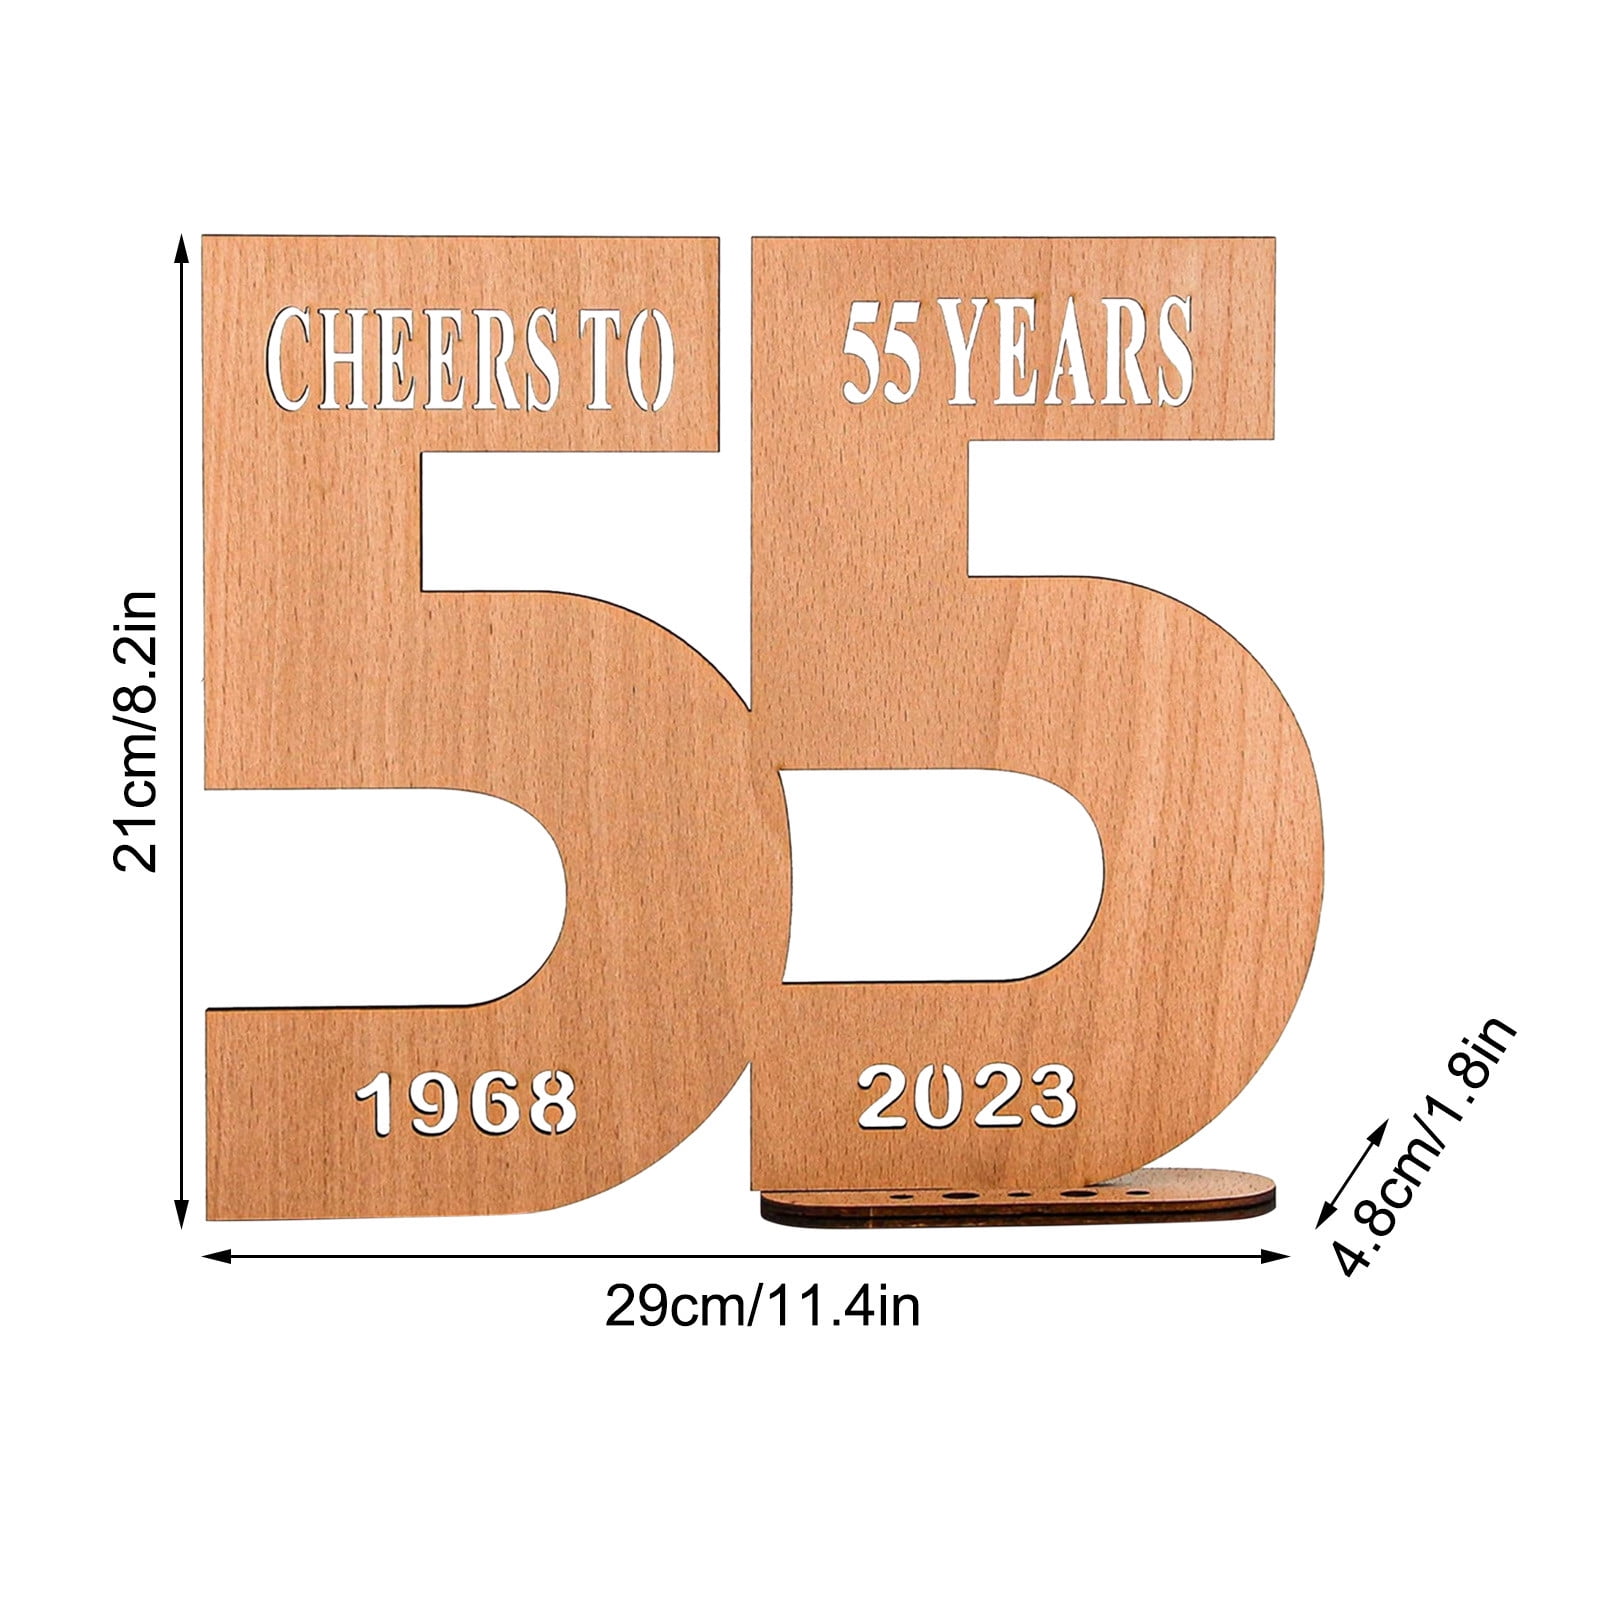 18th Birthday Gifts - Wooden 18th Birthday Money Gift 20 x 10cm - Funny 18th  Birthday Gift Ideas - Happy 18th Birthday Gifts for Women, Men - Creative  18 Bday, (18) : Amazon.in: Home & Kitchen